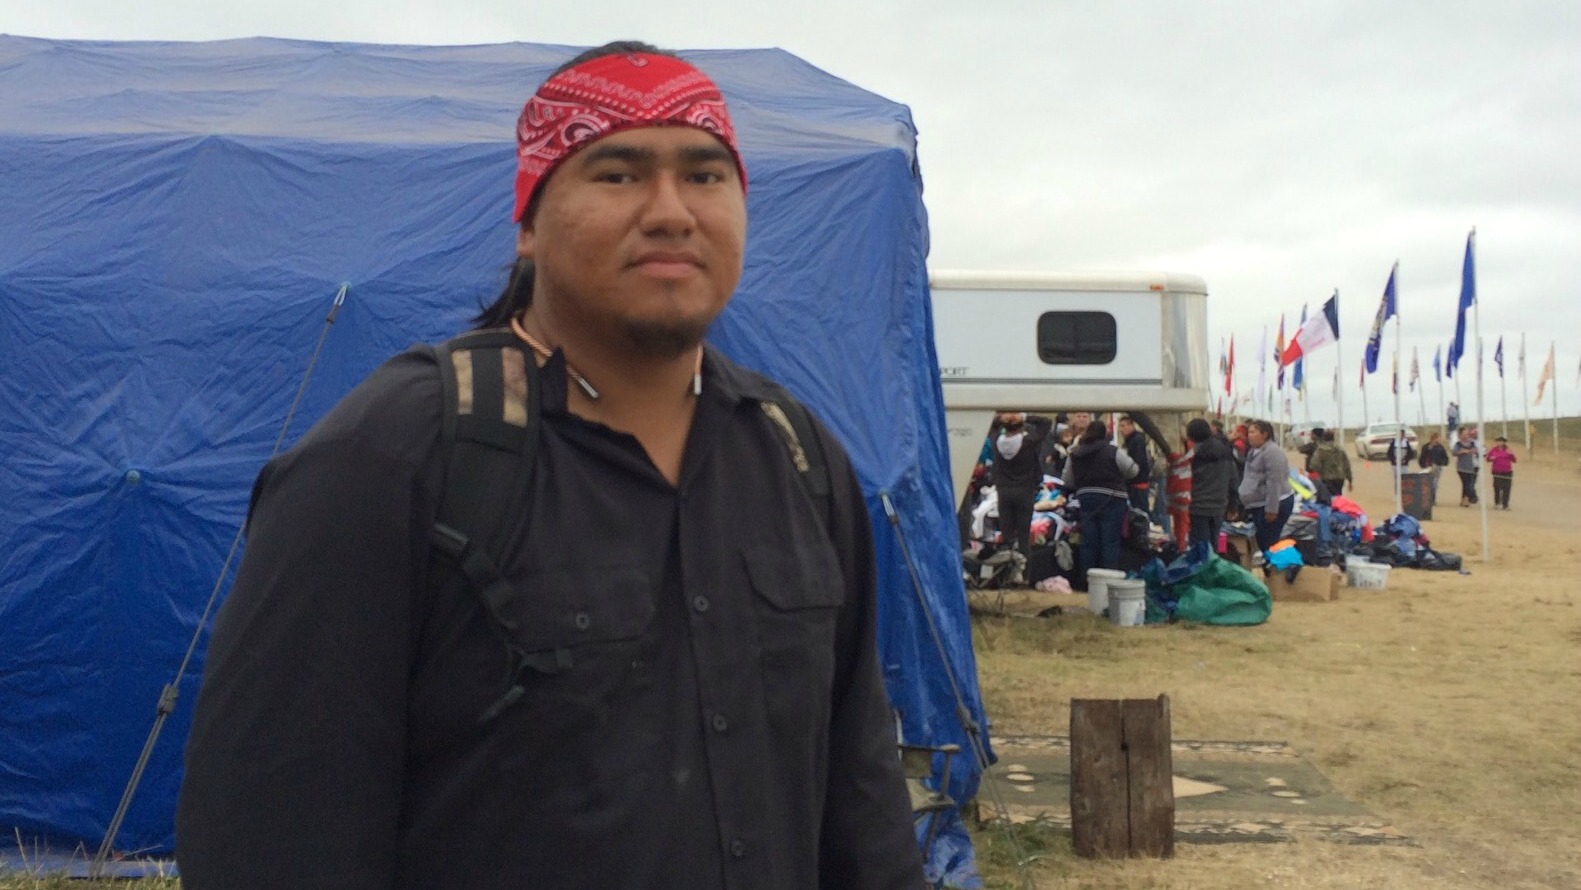 Dale American Horse, Jr., 26, locked himself to construction equipment on August 31, putting his "body on the line" to block Dakota Access.